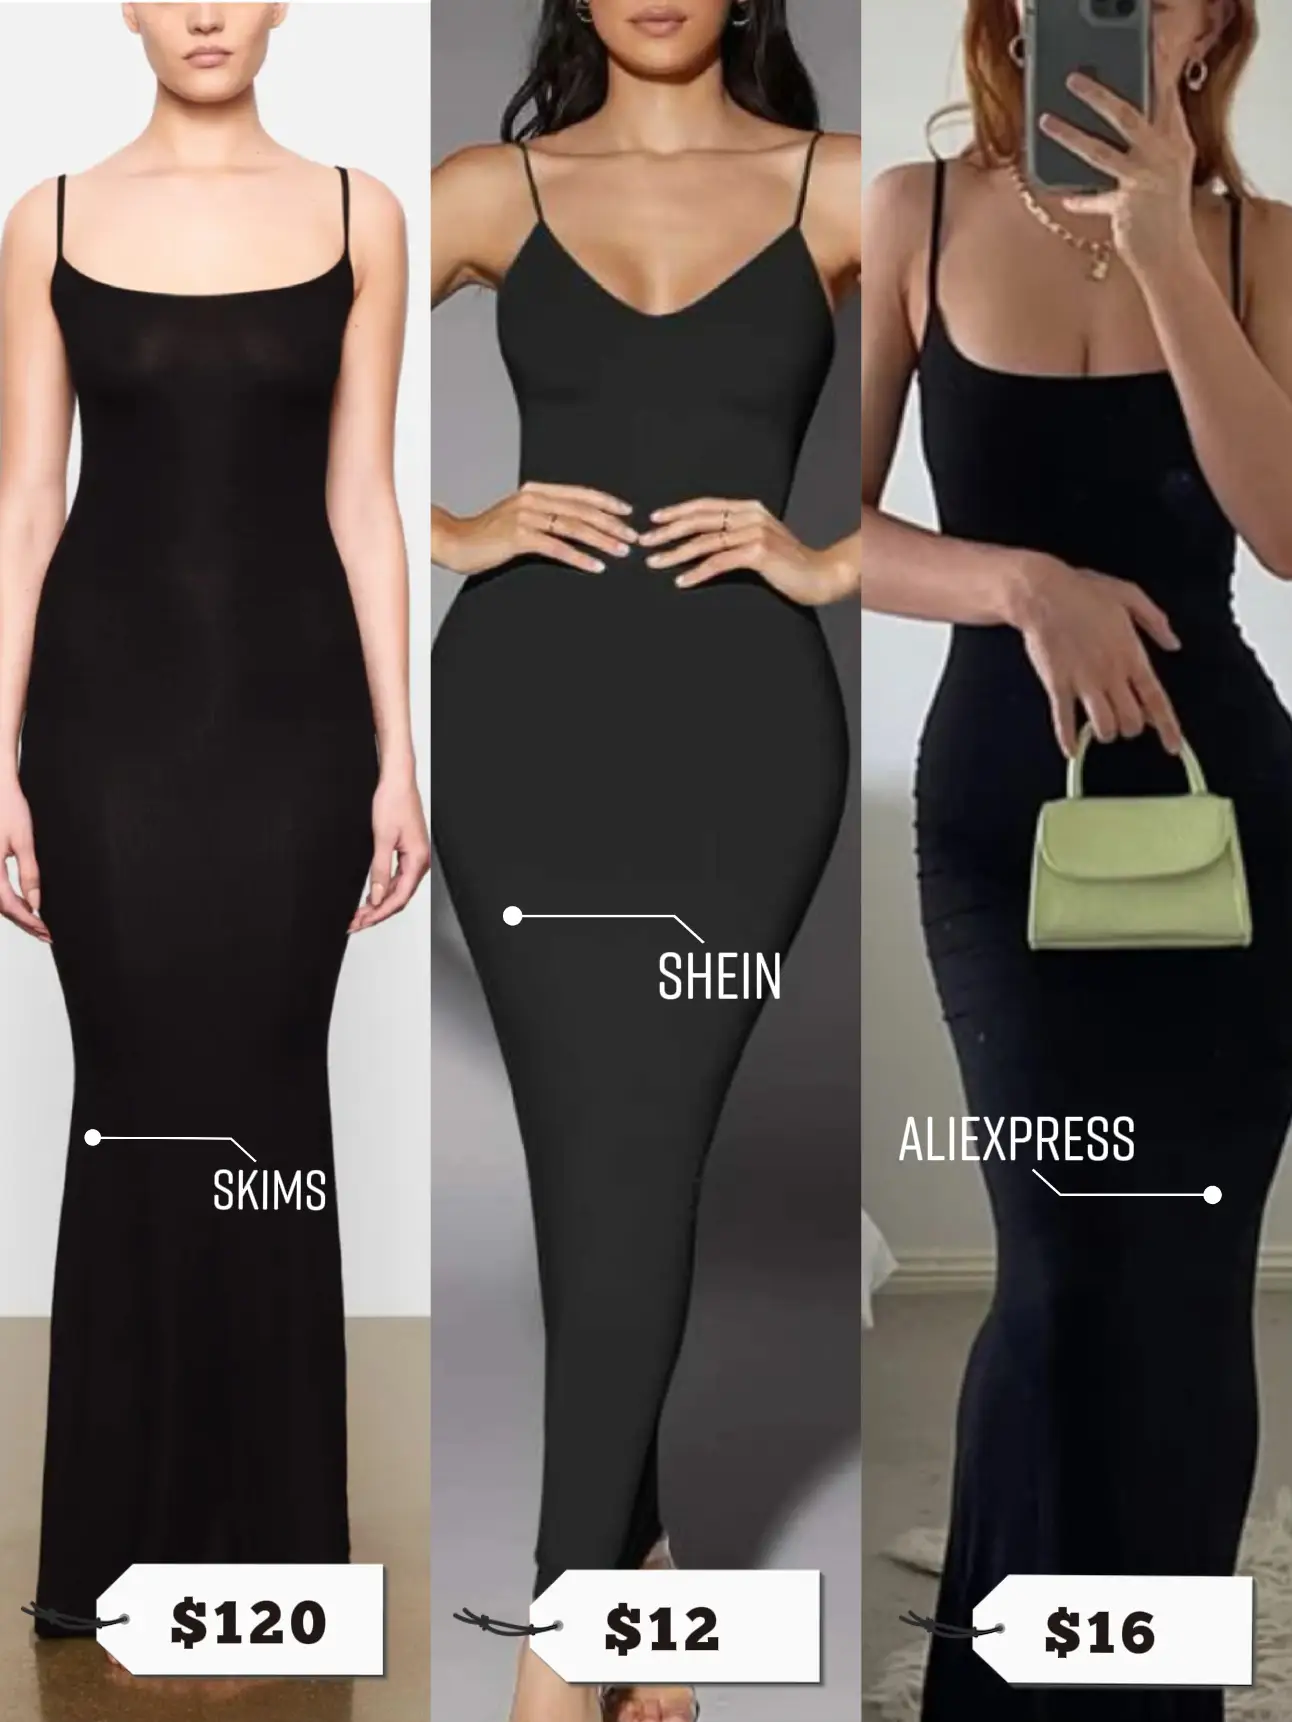 The BEST Zara & Skims dupes on Aliexpress & Shein. Trying Viral TikTok Dupes!  Are they worth it? 